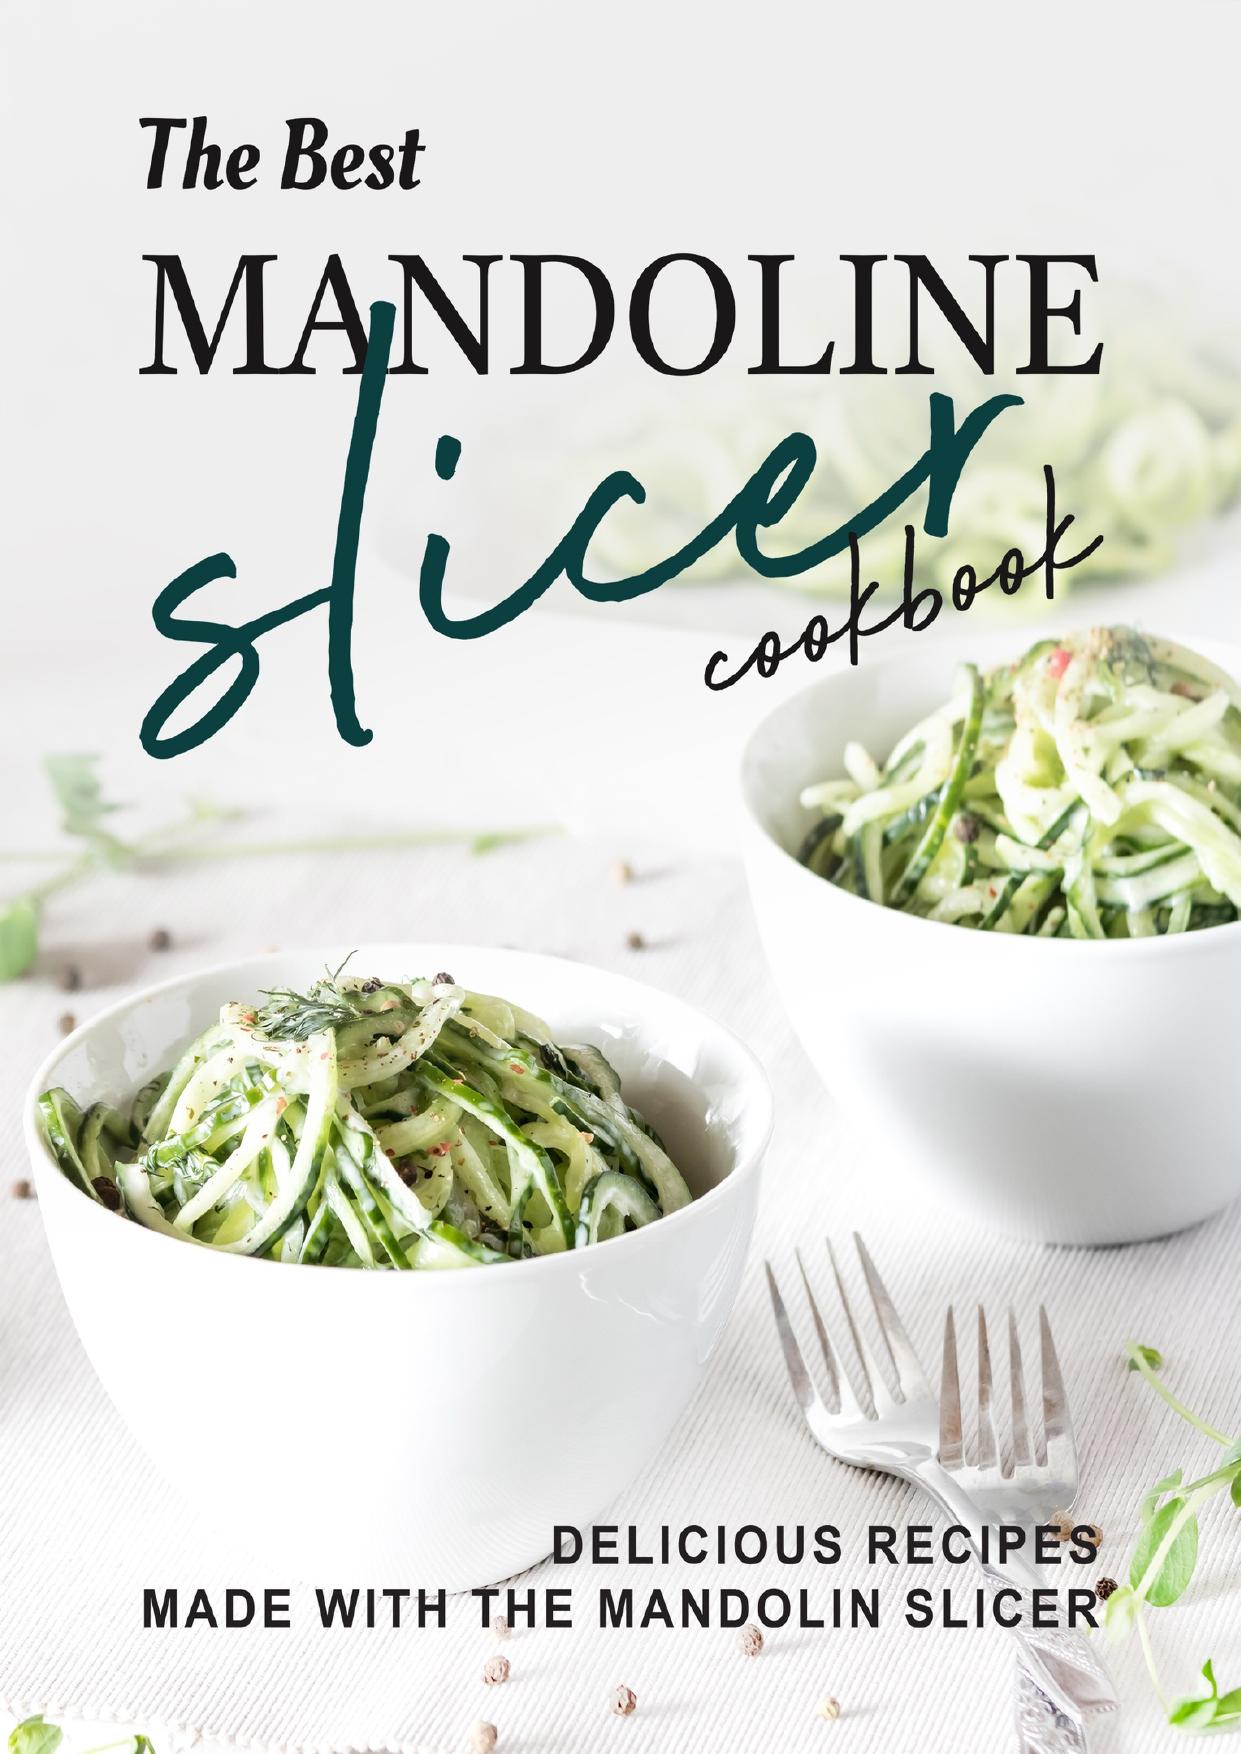 The Best Mandoline Slicer Cookbook: Delicious Recipes Made with the Mandolin Slicer by Niro Brooklyn